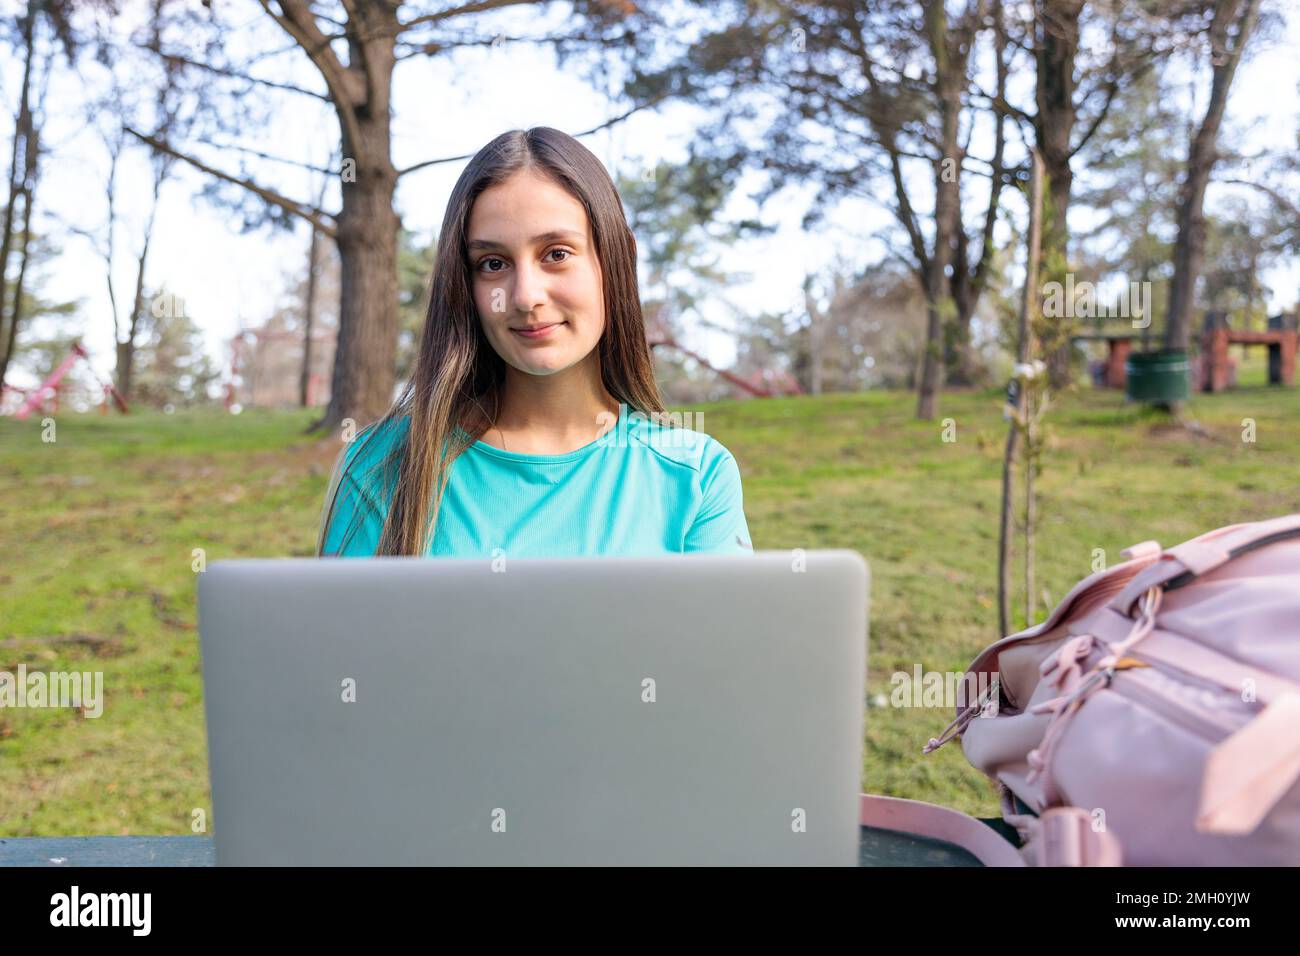 Female university student studying, using a laptop and sitting outside in a park. Looking at camera Stock Photo